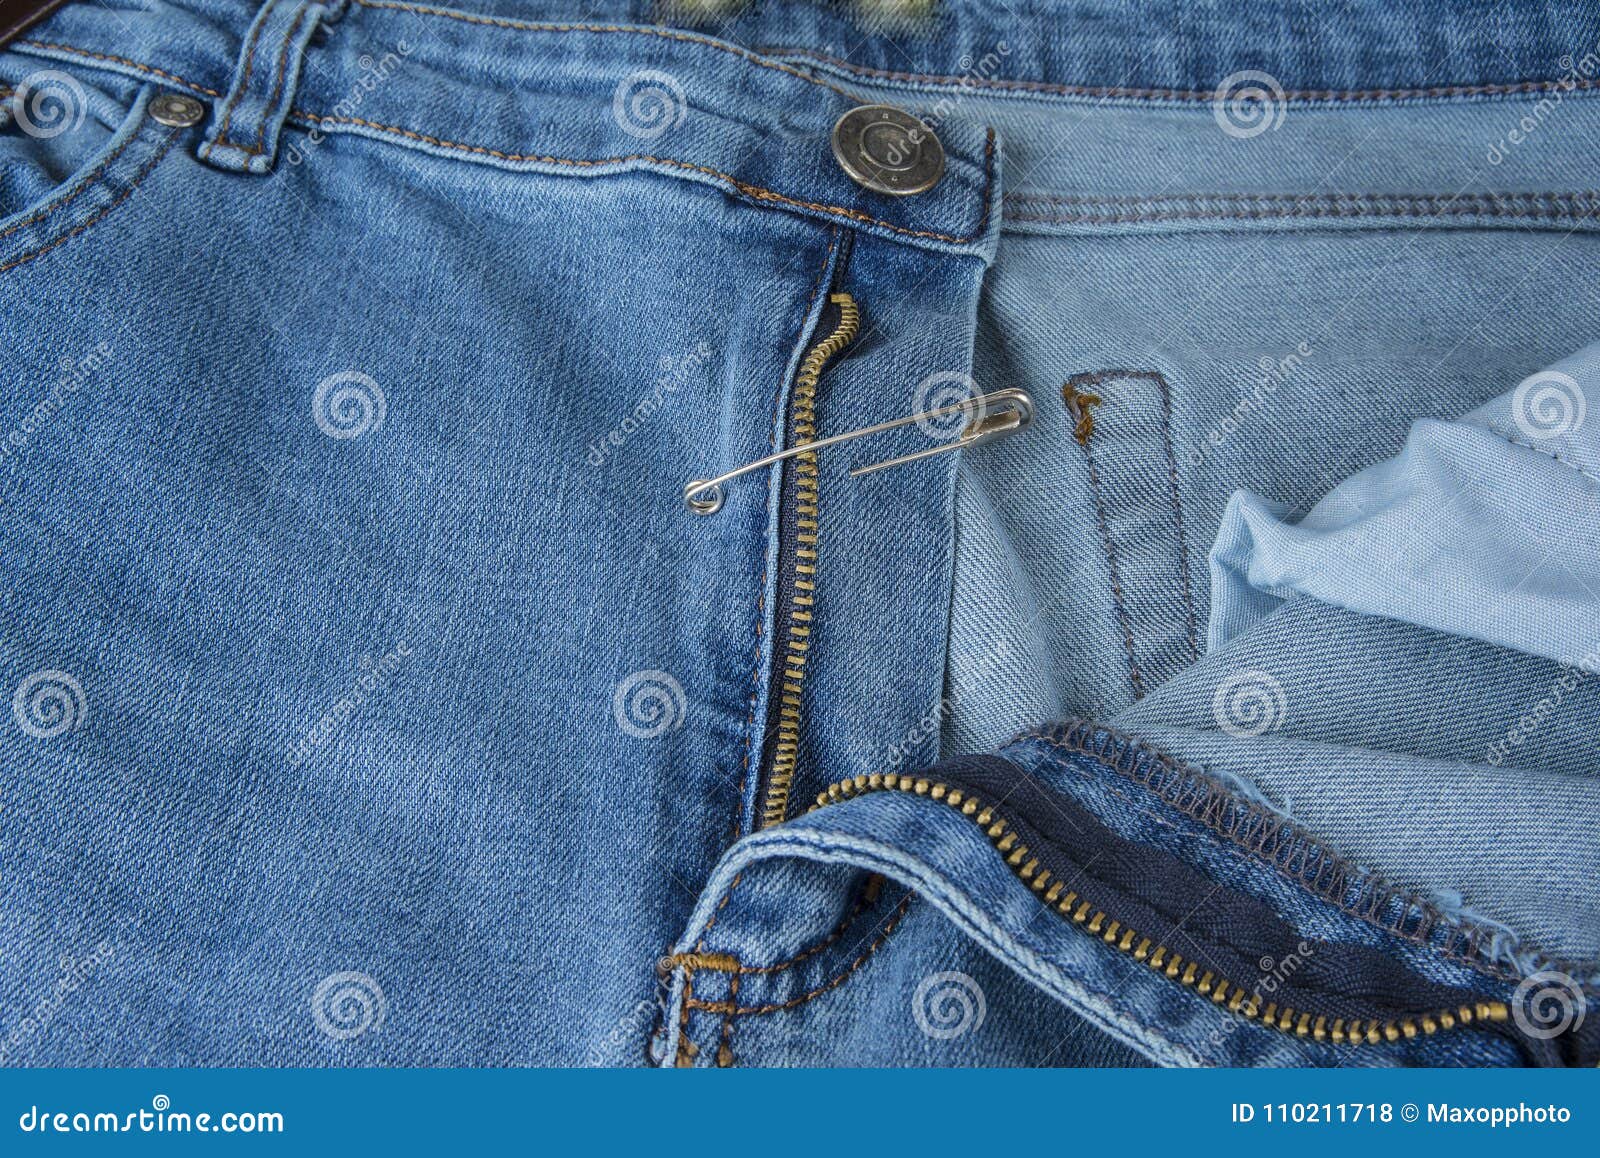 Broken Blue Jeans Zipper Fixed with Safety Pin. Stock Photo - Image of ...